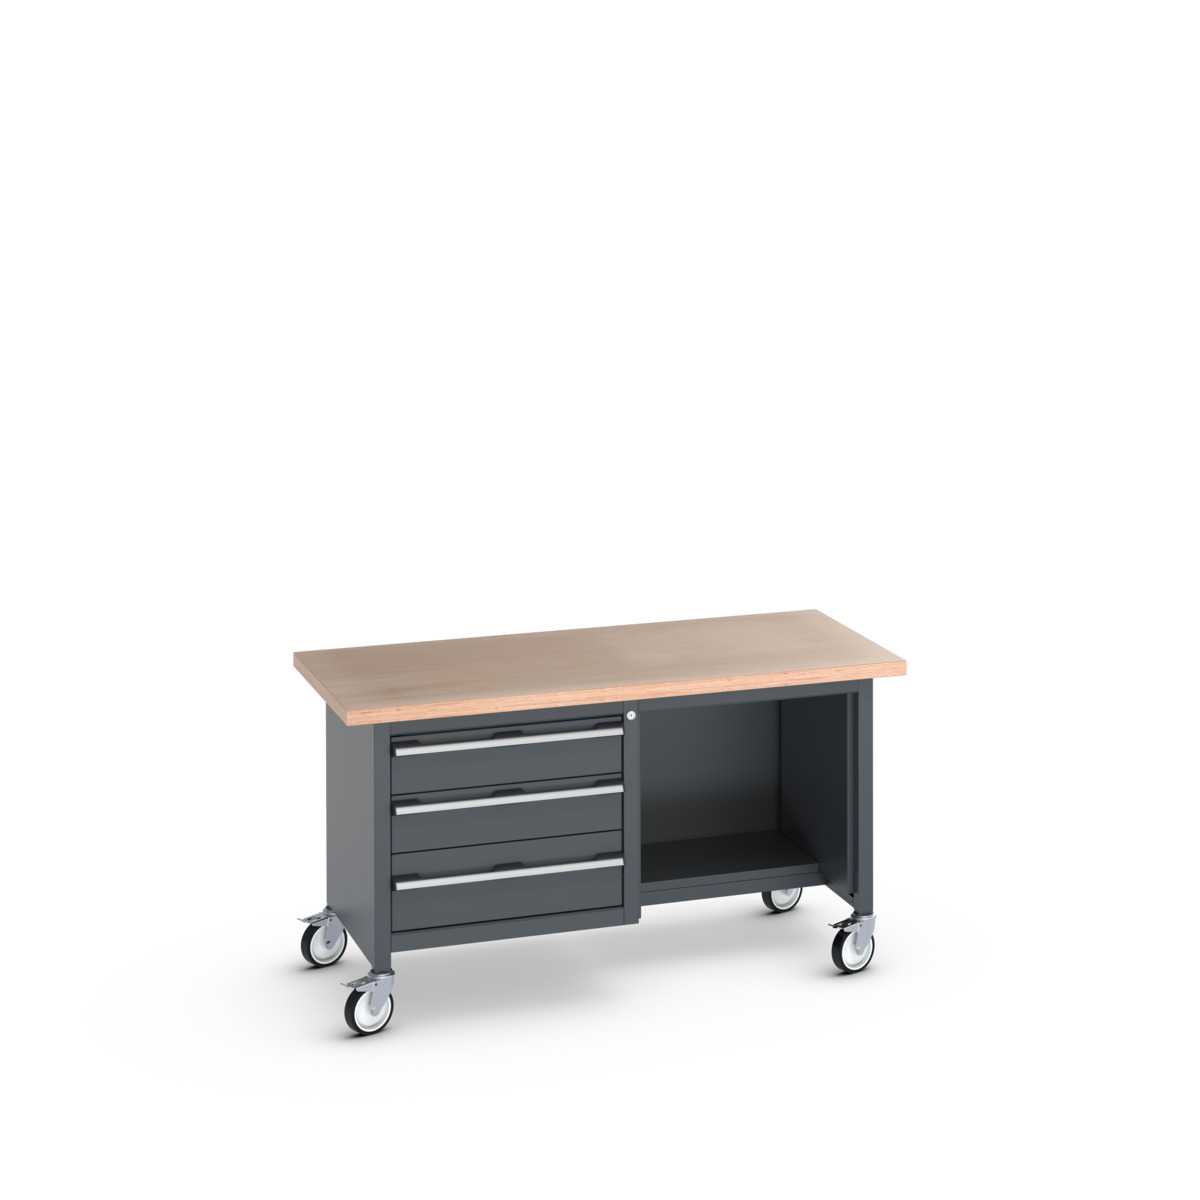 41002115.77V - cubio mobile storage bench (mpx)